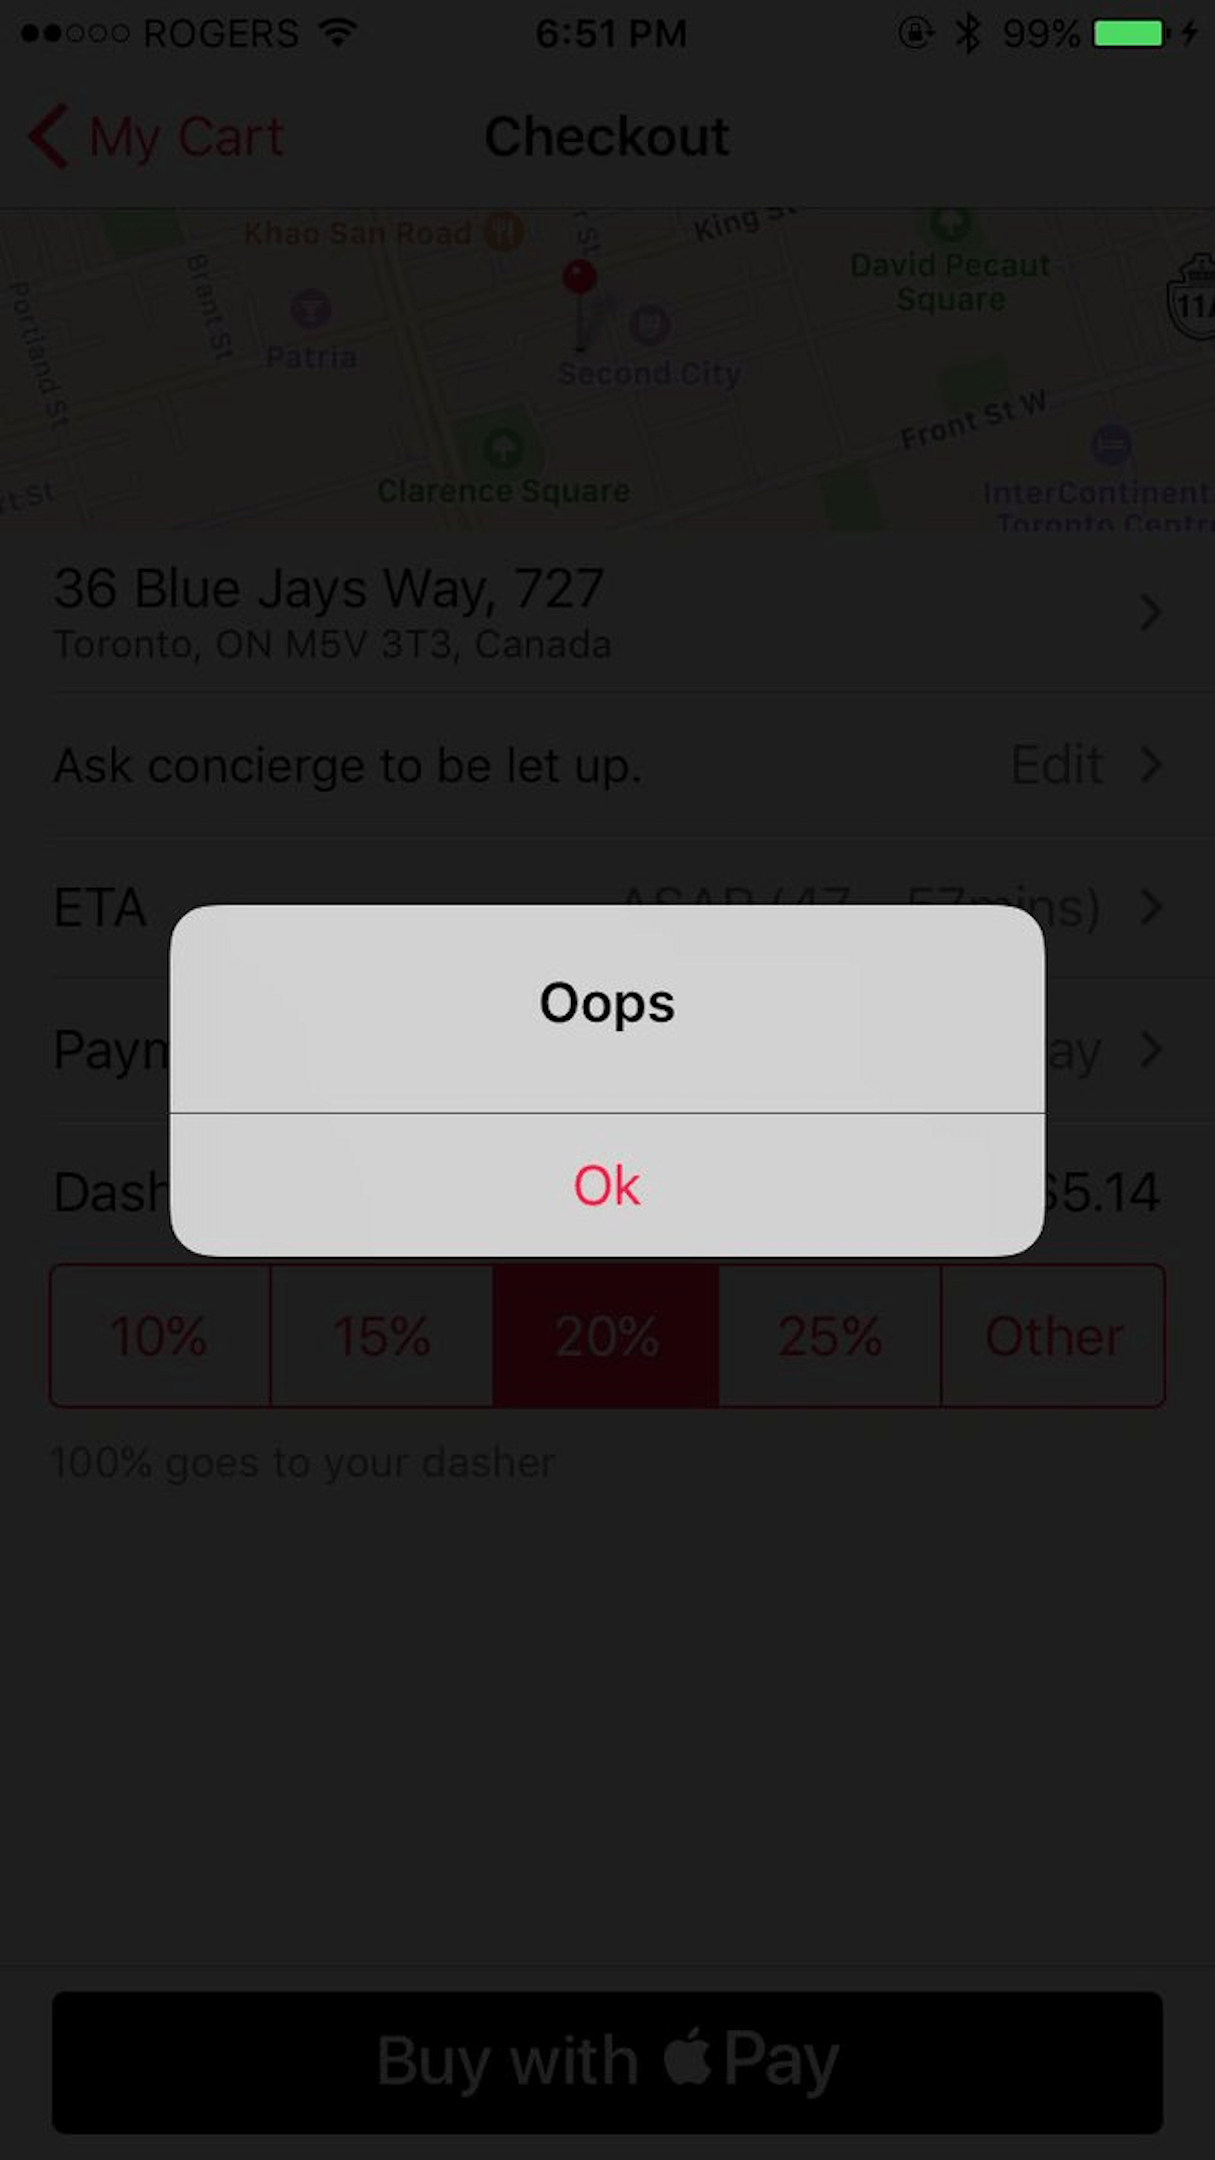 microcopy: a vague error message that just says "Oops" on a mobile app